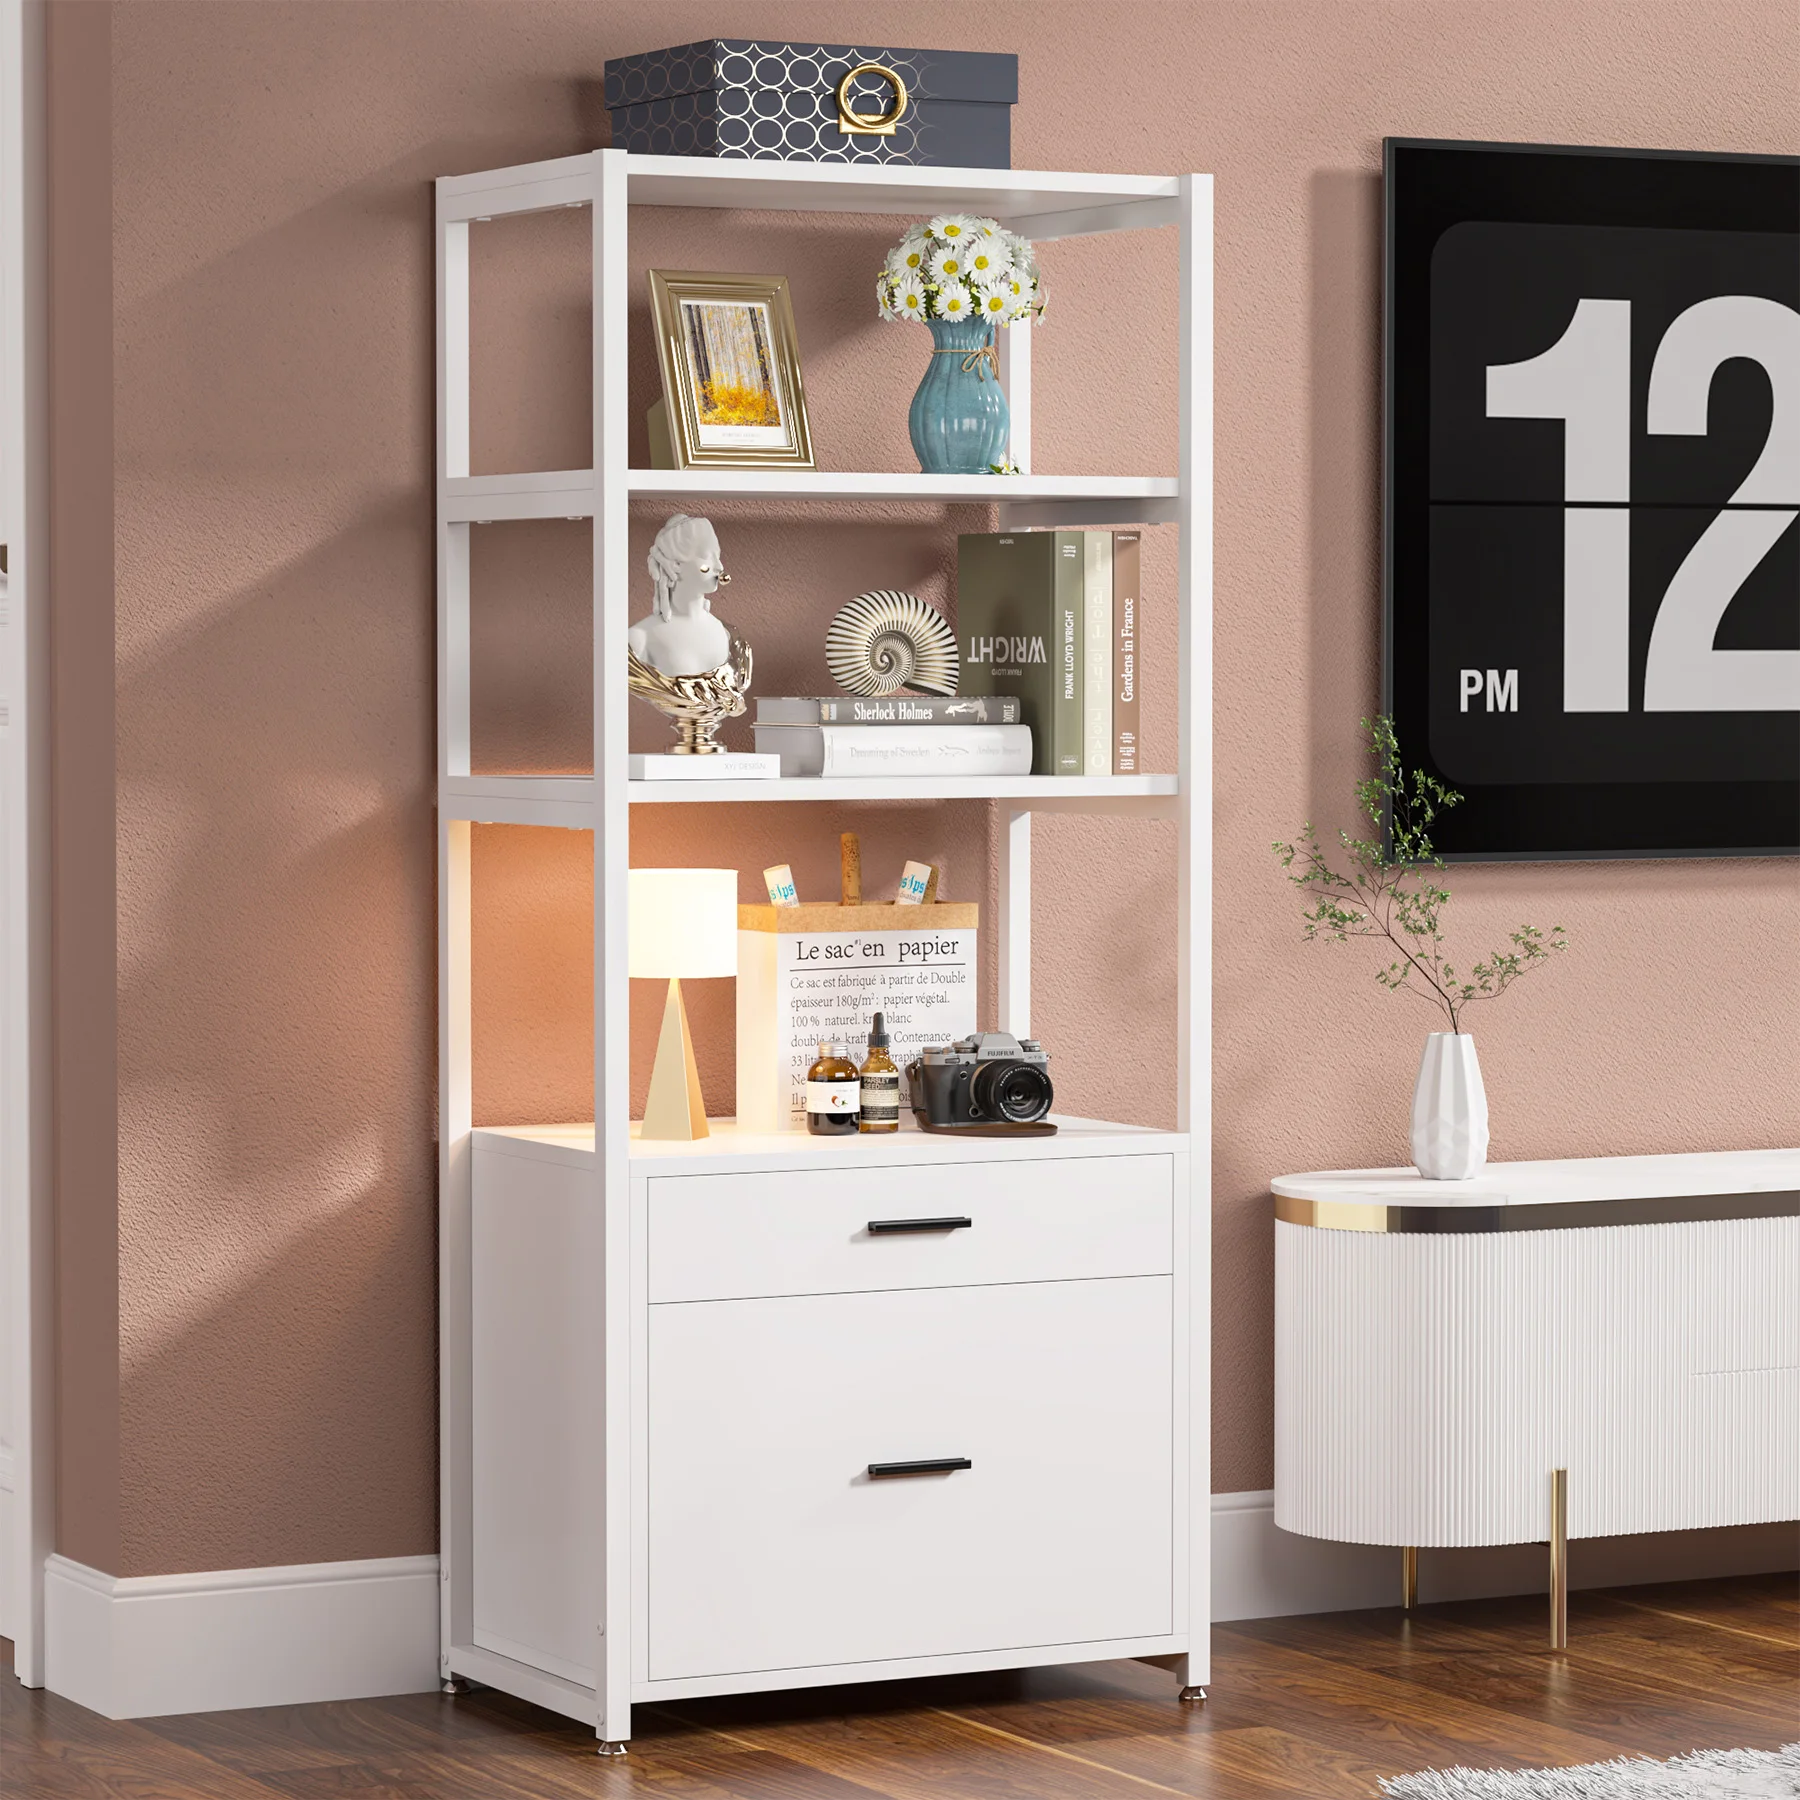 Mobile Lateral White 2 Drawer Wood File Cabinets Letter Legal Size Filing Cabinet with Storage open shelves for books